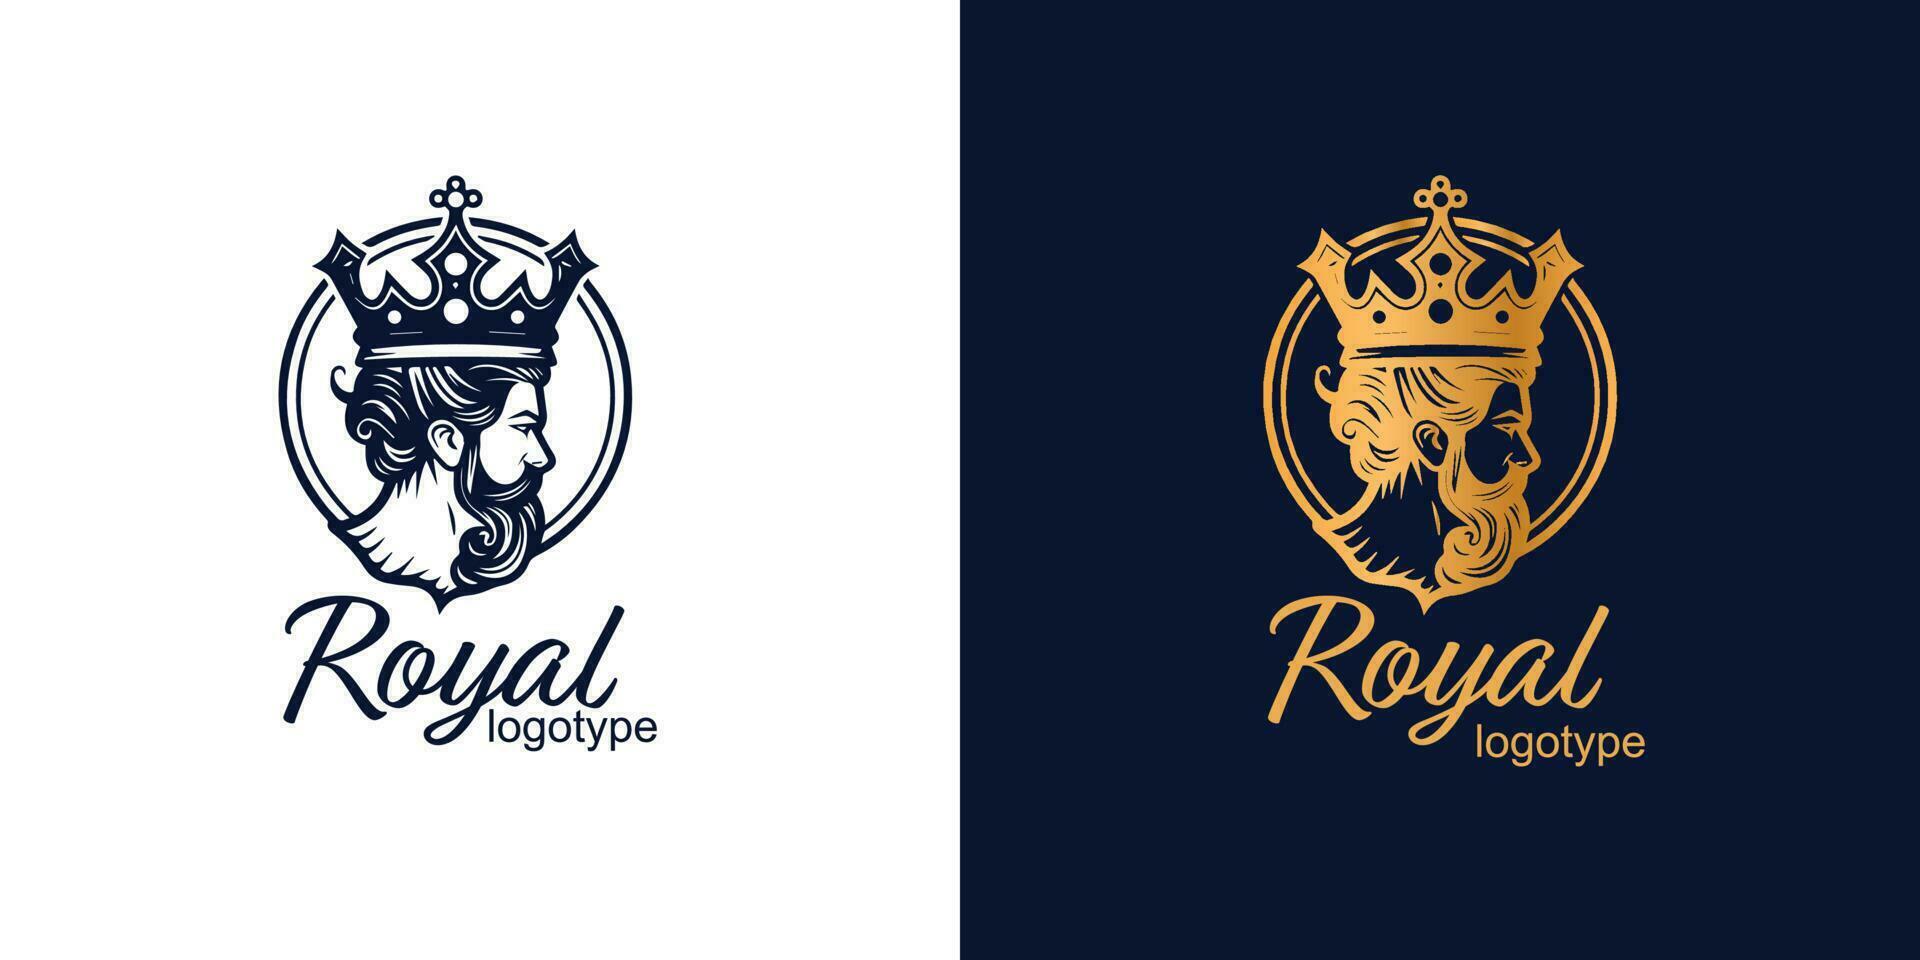 Crown Luxury Concept Logo Design Template on blue and white background. Logotype vector sign